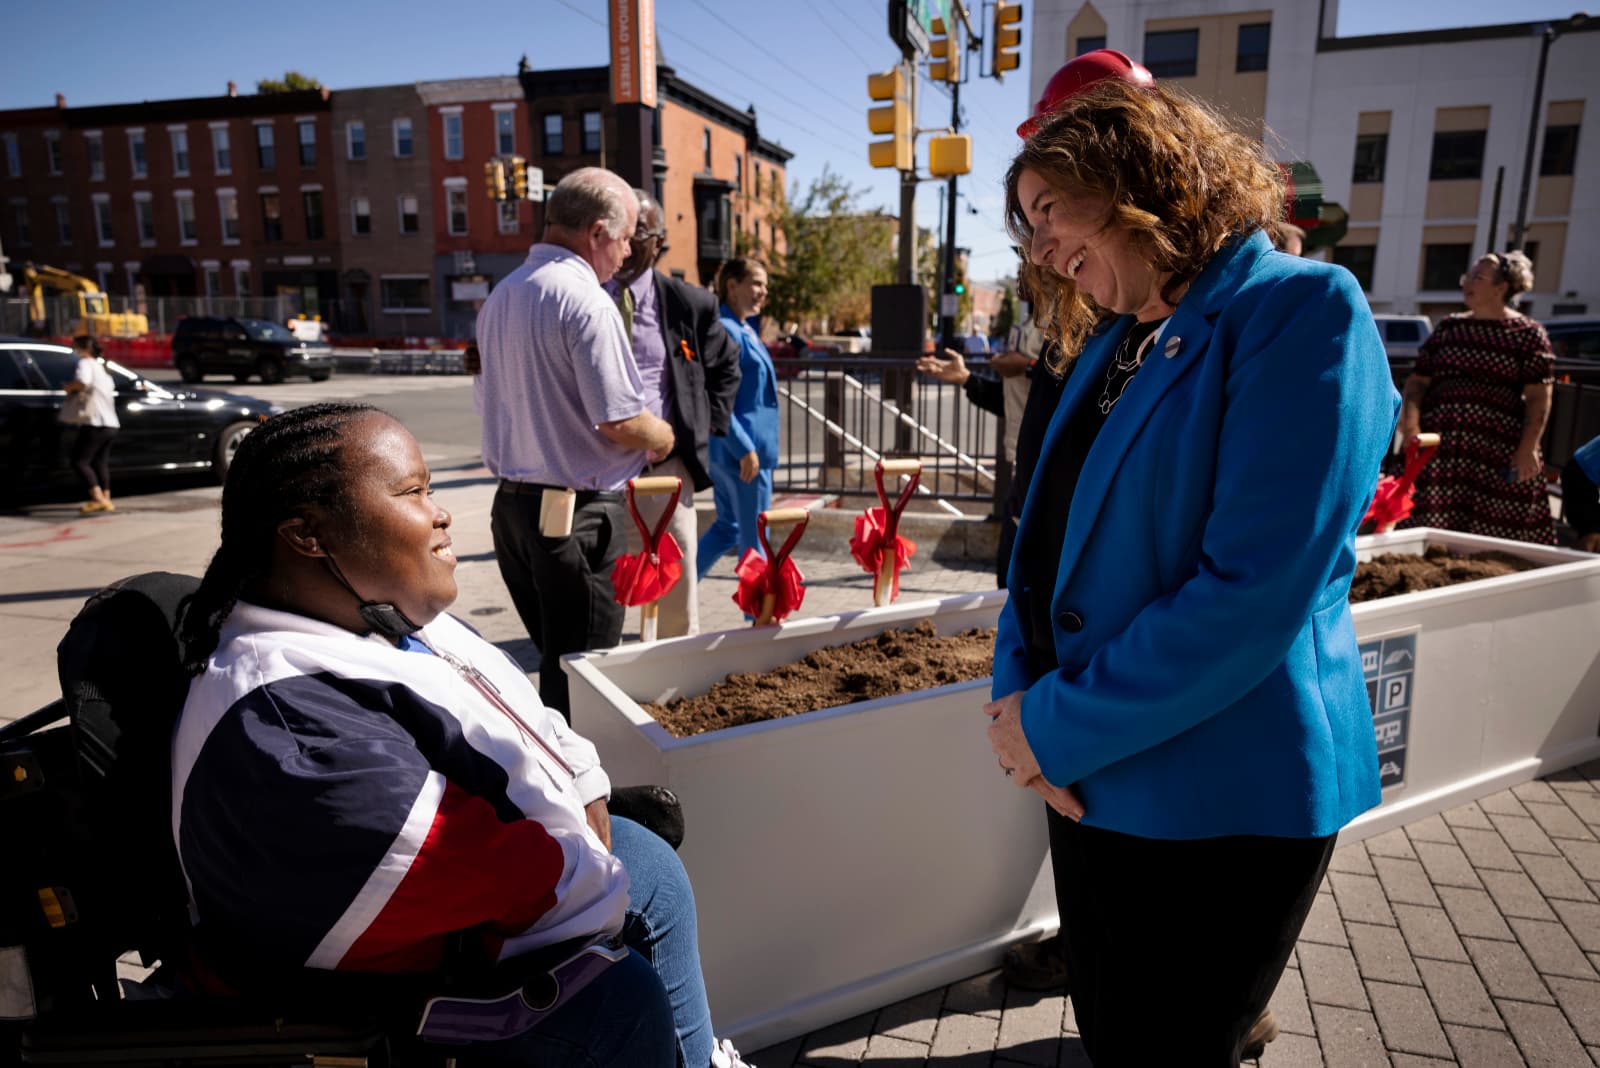 On a city sidewalk next to a planter filled with fresh soil, a Black woman using a wheelchair and a white woman wearing a suit chat, among other small groups